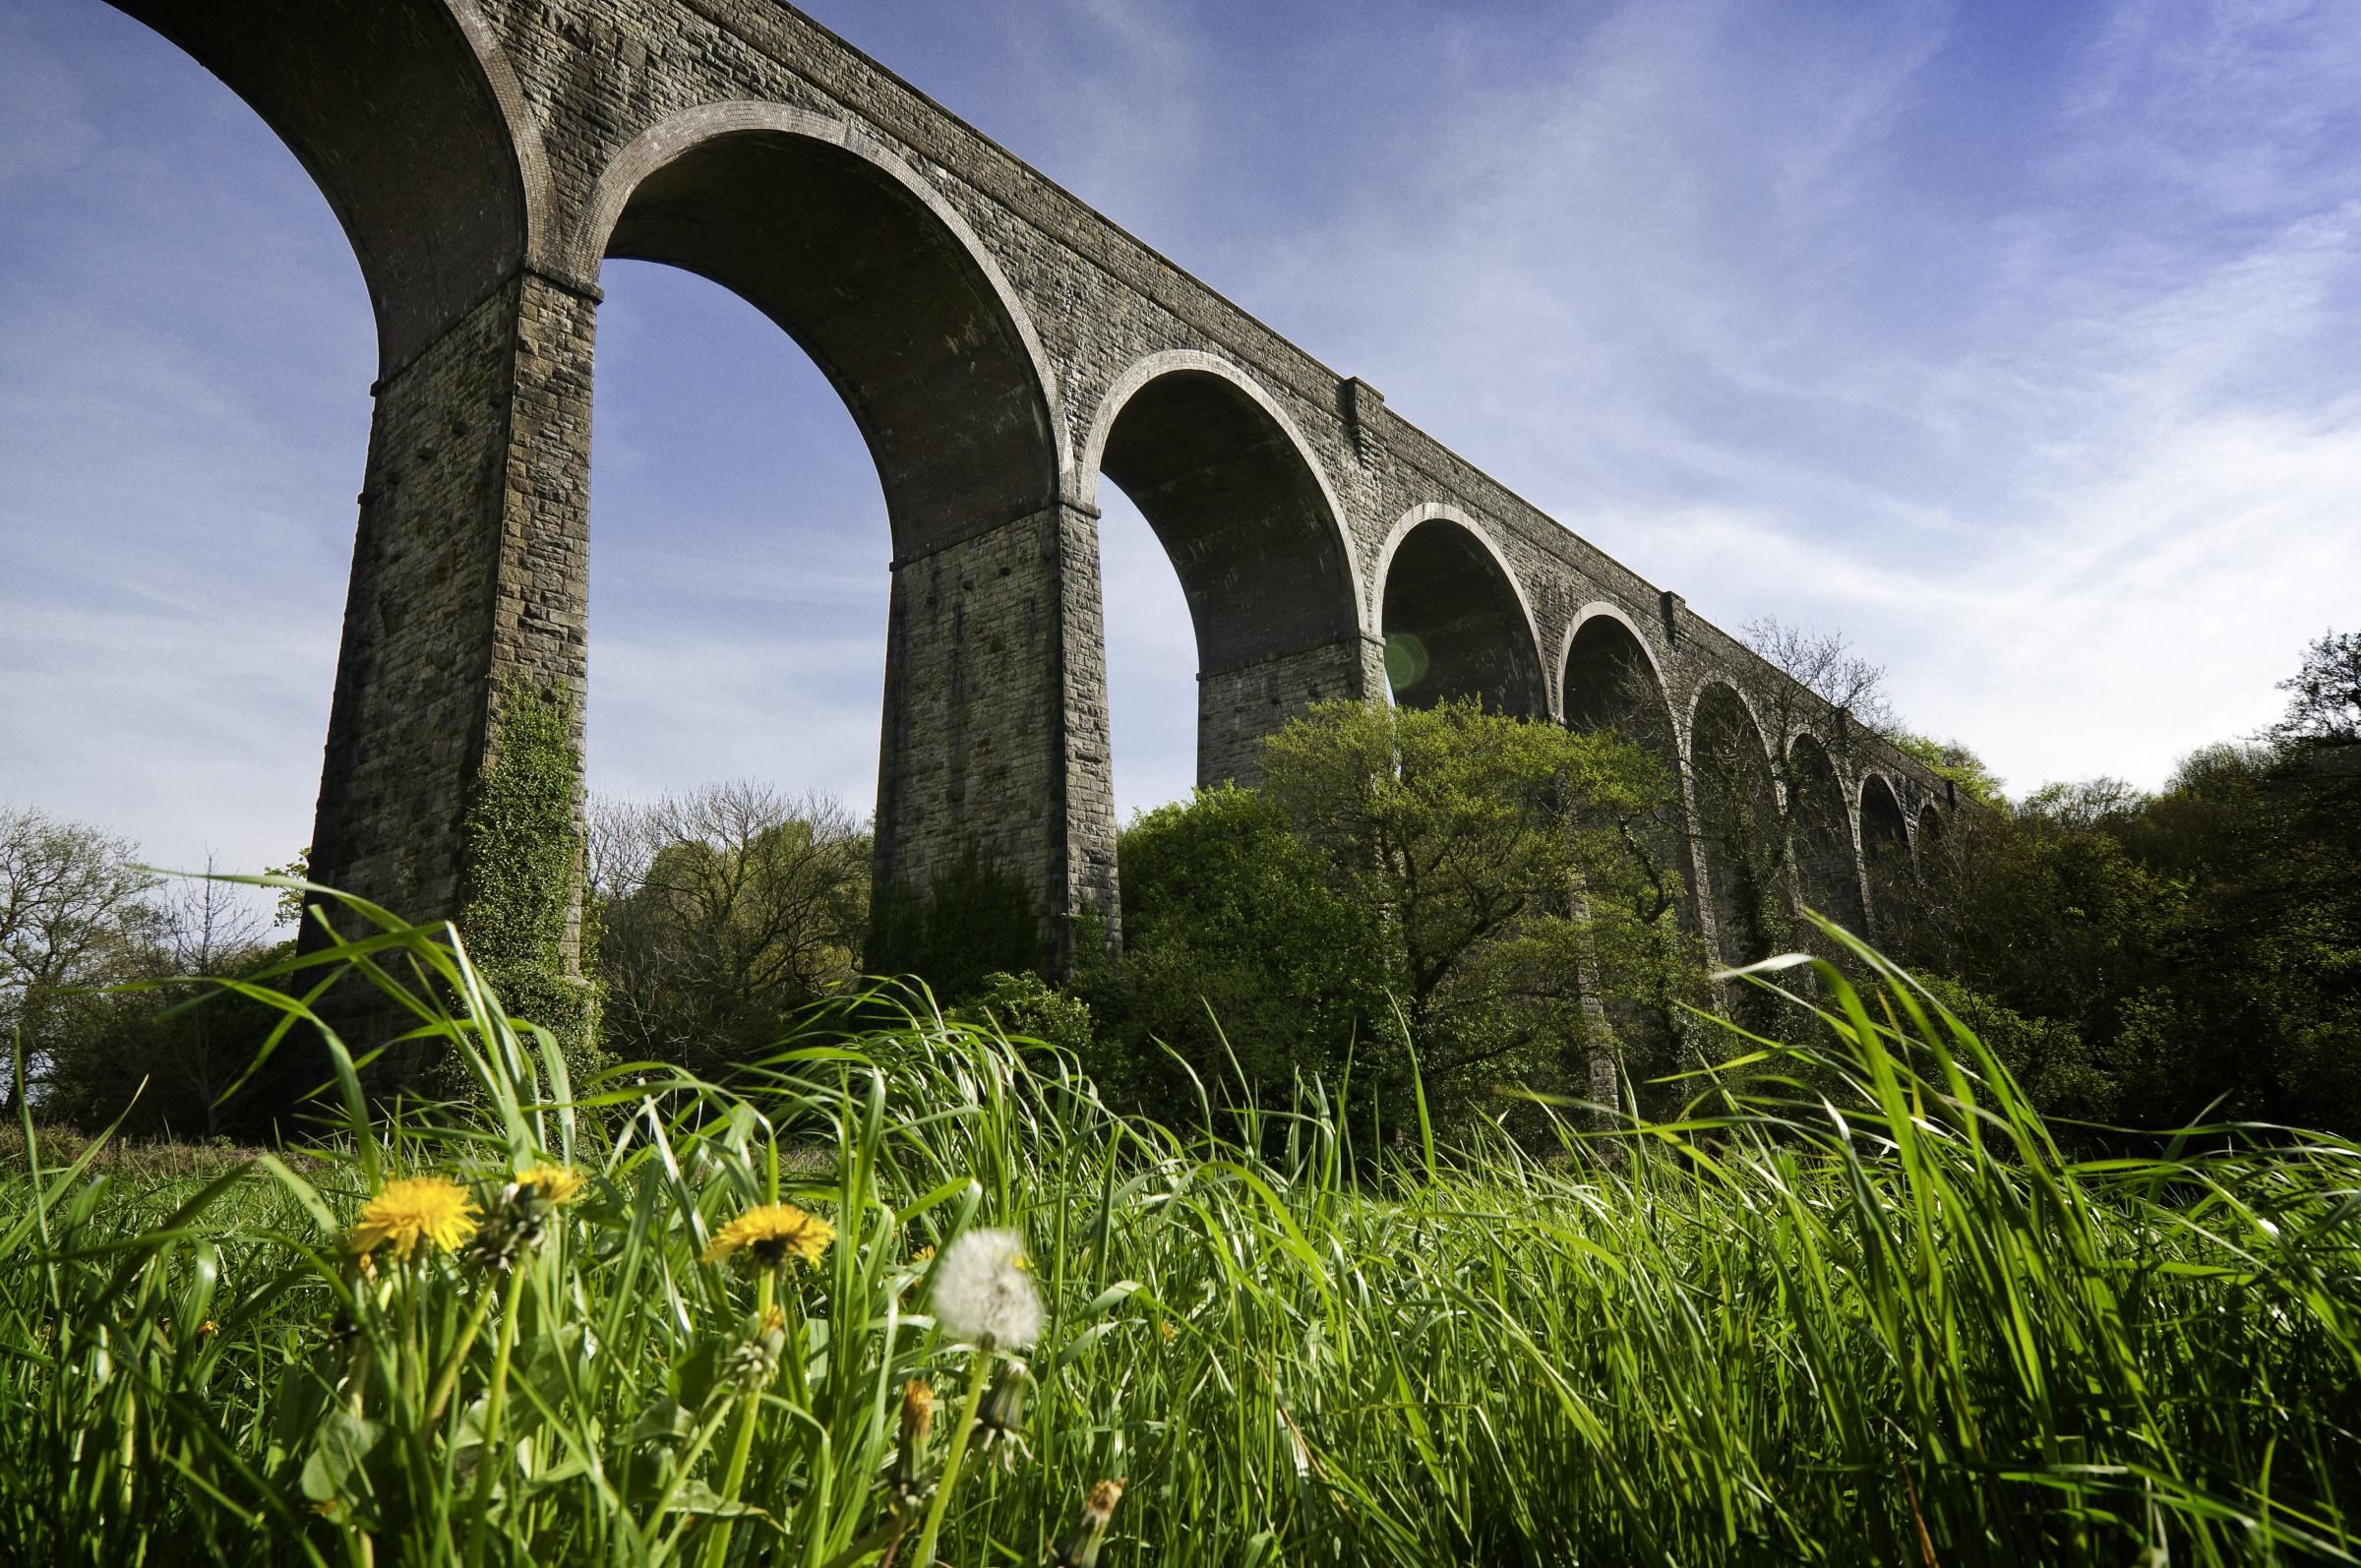 Viaduct at Porthkerry Country Park